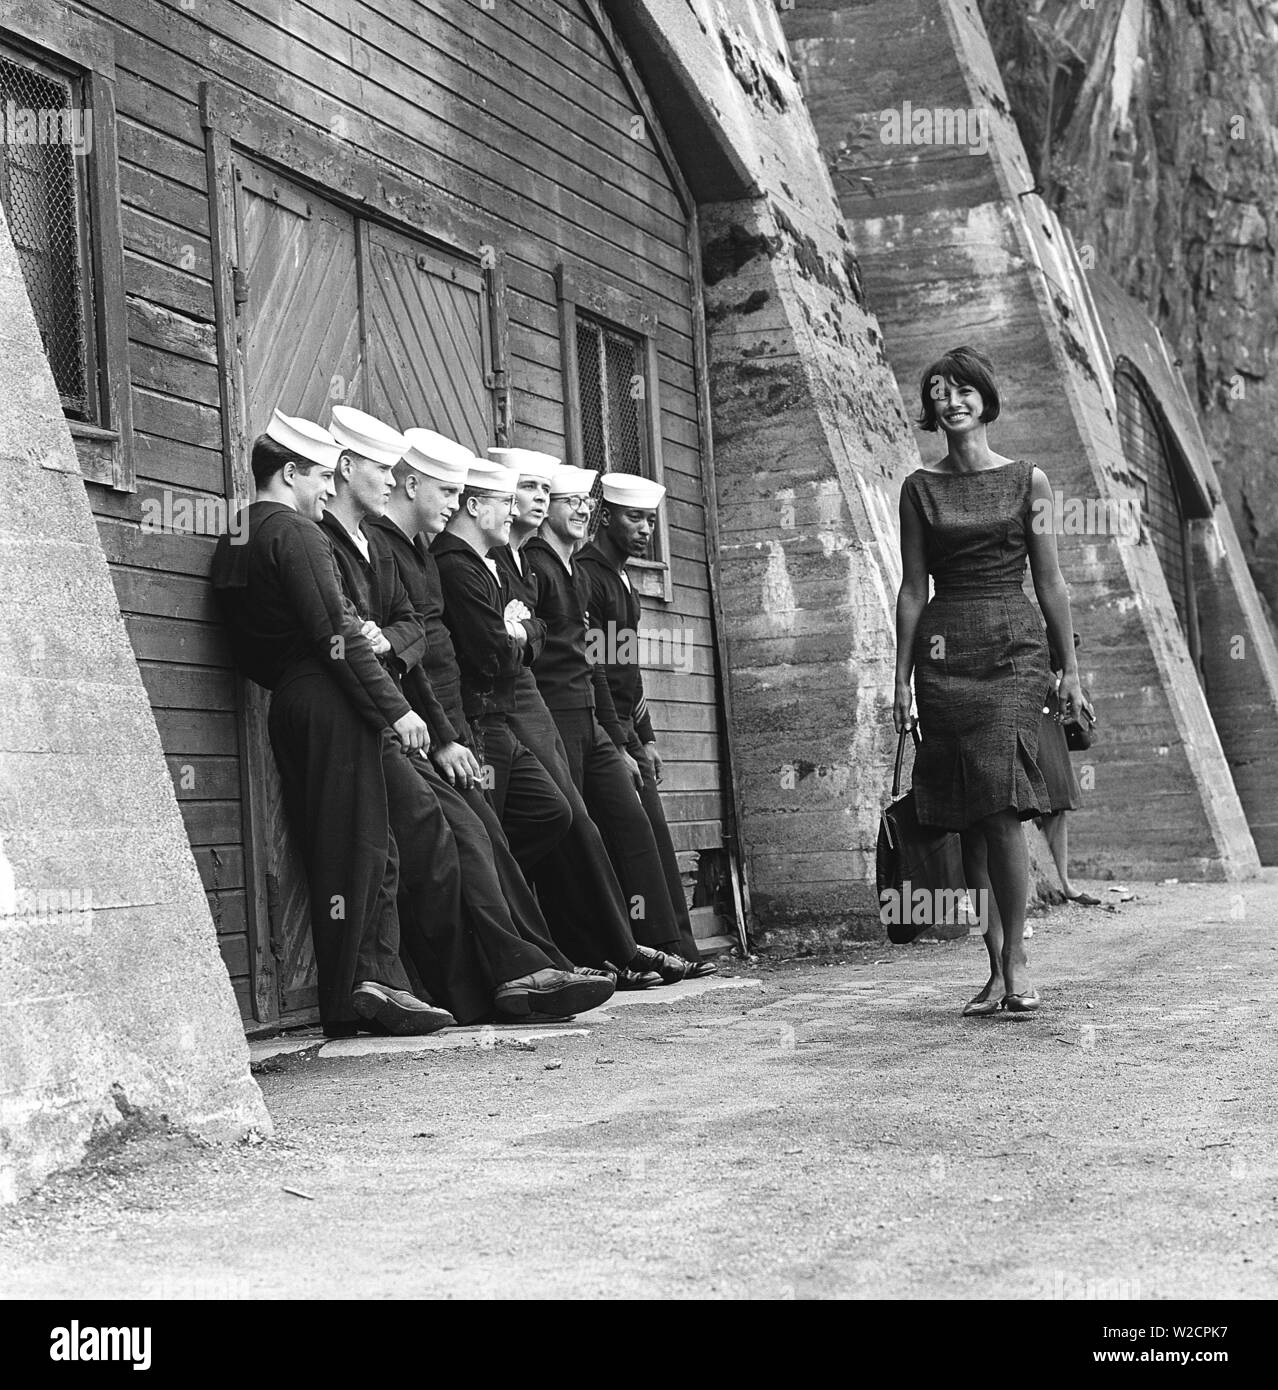 Fashion in the 1960s. A group of American sailors are standing at the docks on shore leave and makes a nice addition to the fashion shoot. A young model passes them wearing a dress with matching handbag and shoes. Sweden 1964 ref BV59-6 Stock Photo